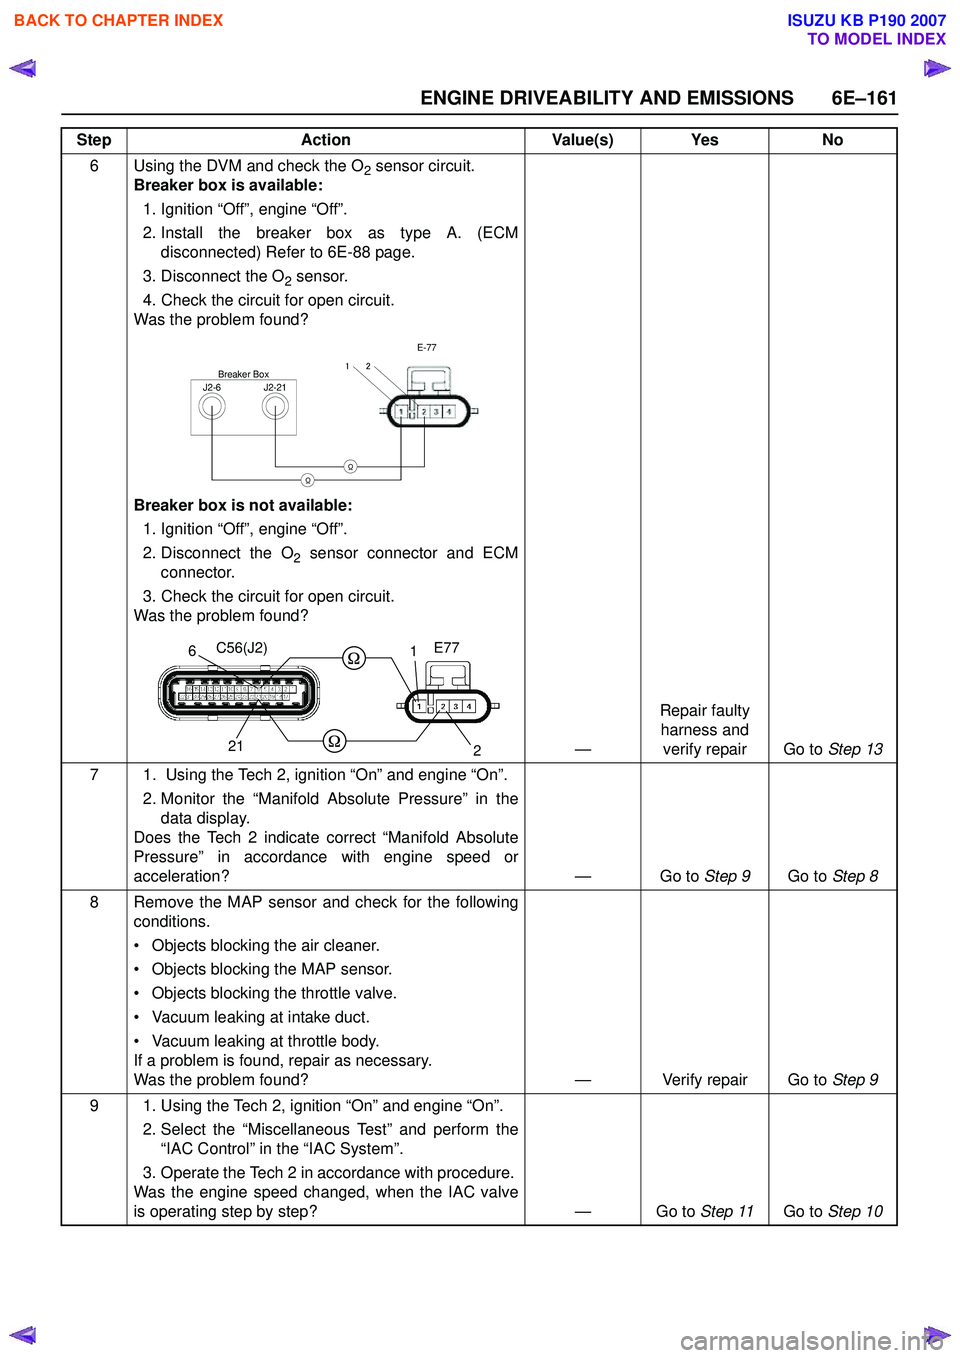 ISUZU KB P190 2007  Workshop Repair Manual ENGINE DRIVEABILITY AND EMISSIONS 6E–161
6 Using the DVM and check the O2 sensor circuit.
Breaker box is available: 
1. Ignition “Off”, engine “Off”.  
2. Install the breaker box as type A. 